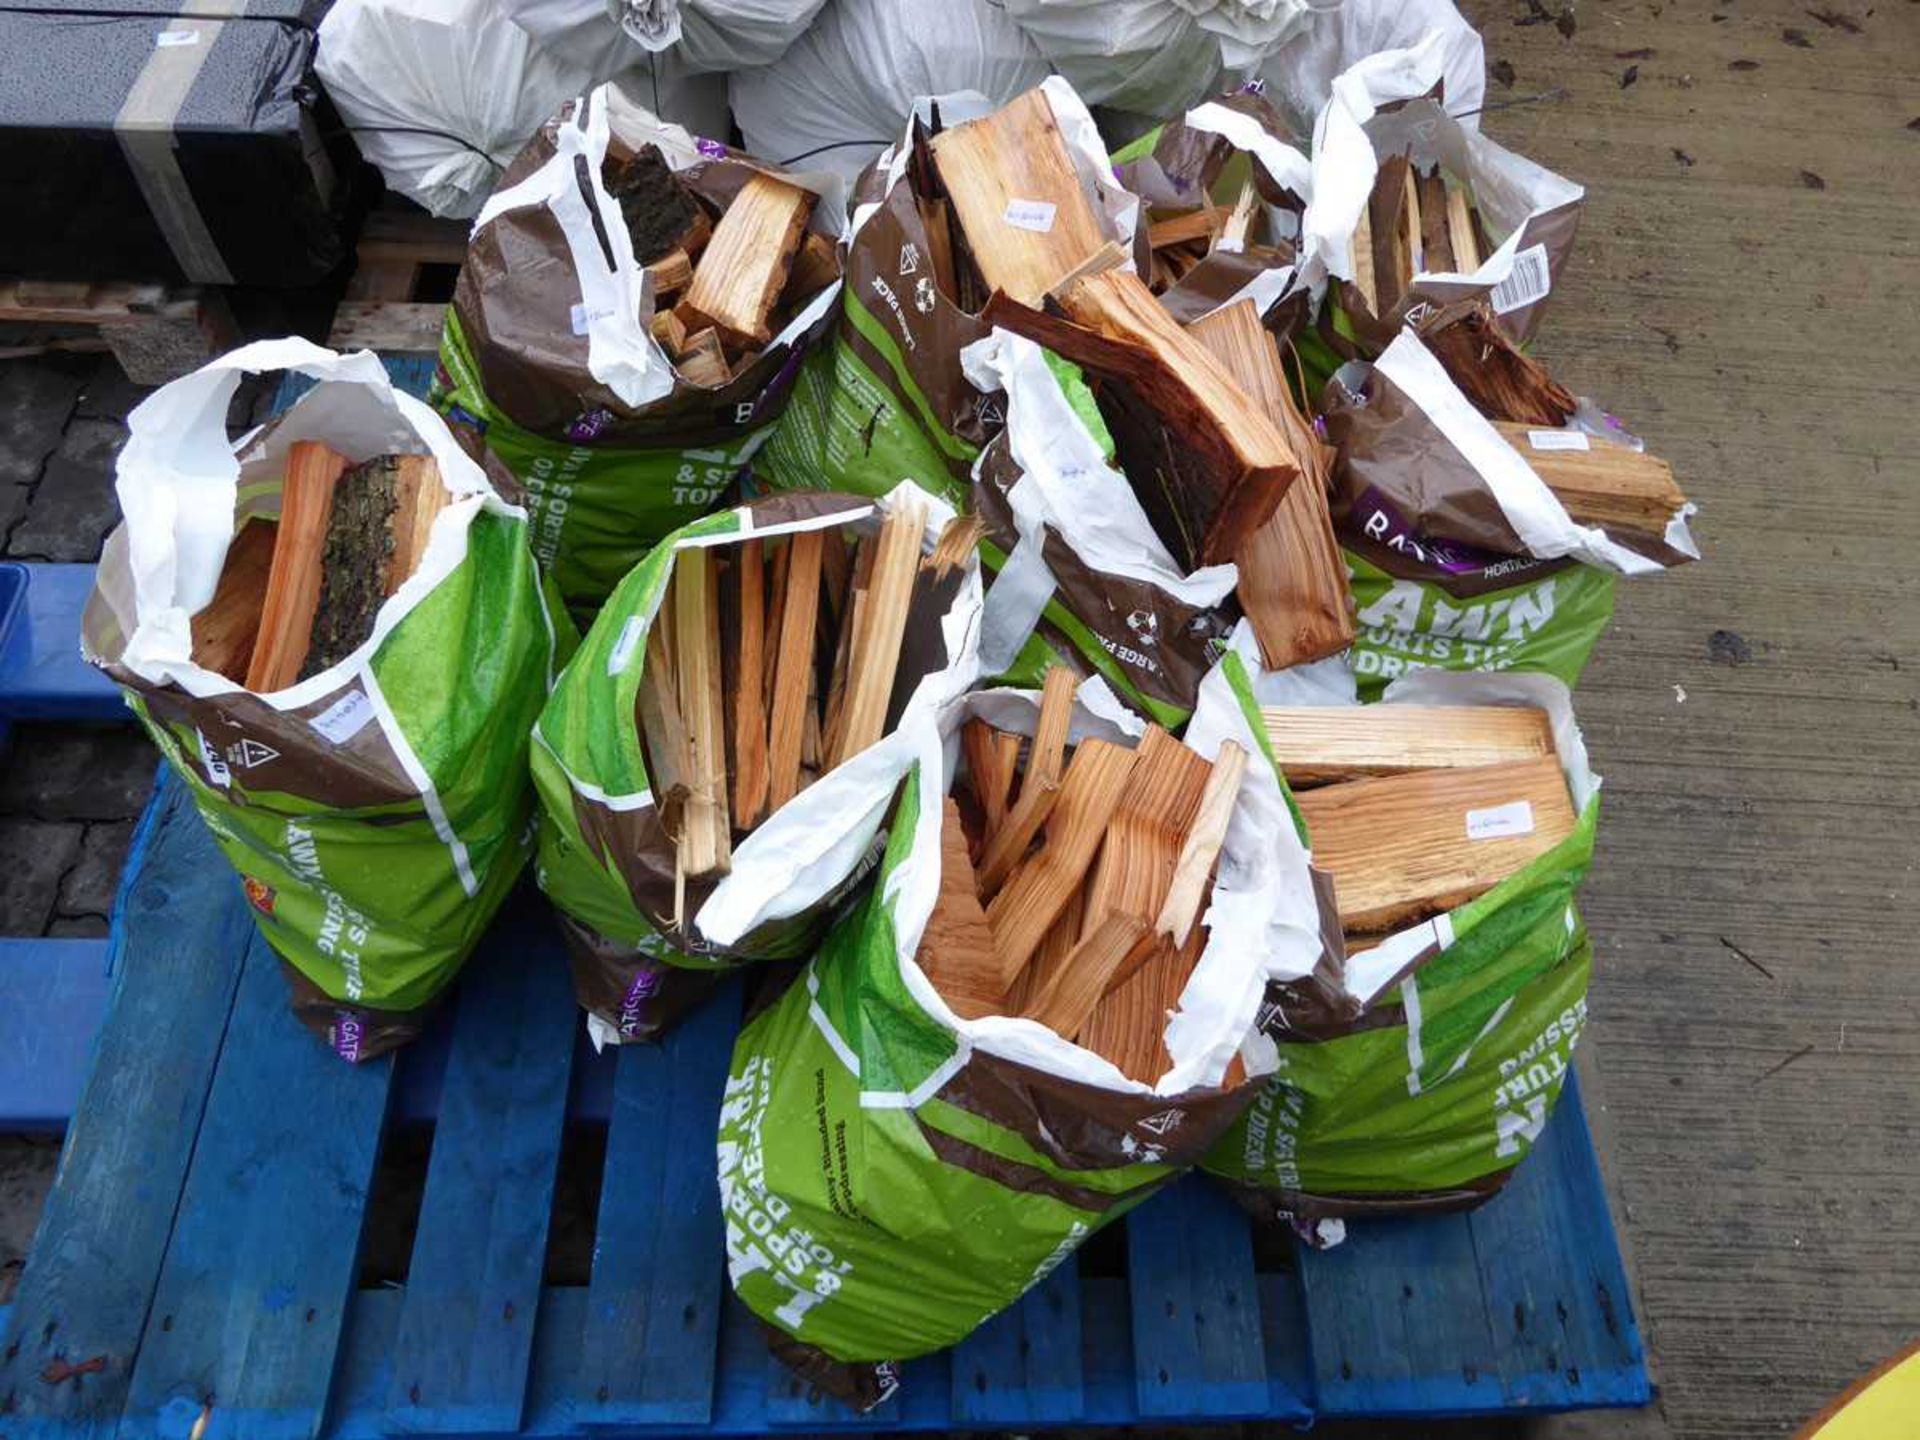 Pallet containing bags of chopped wood